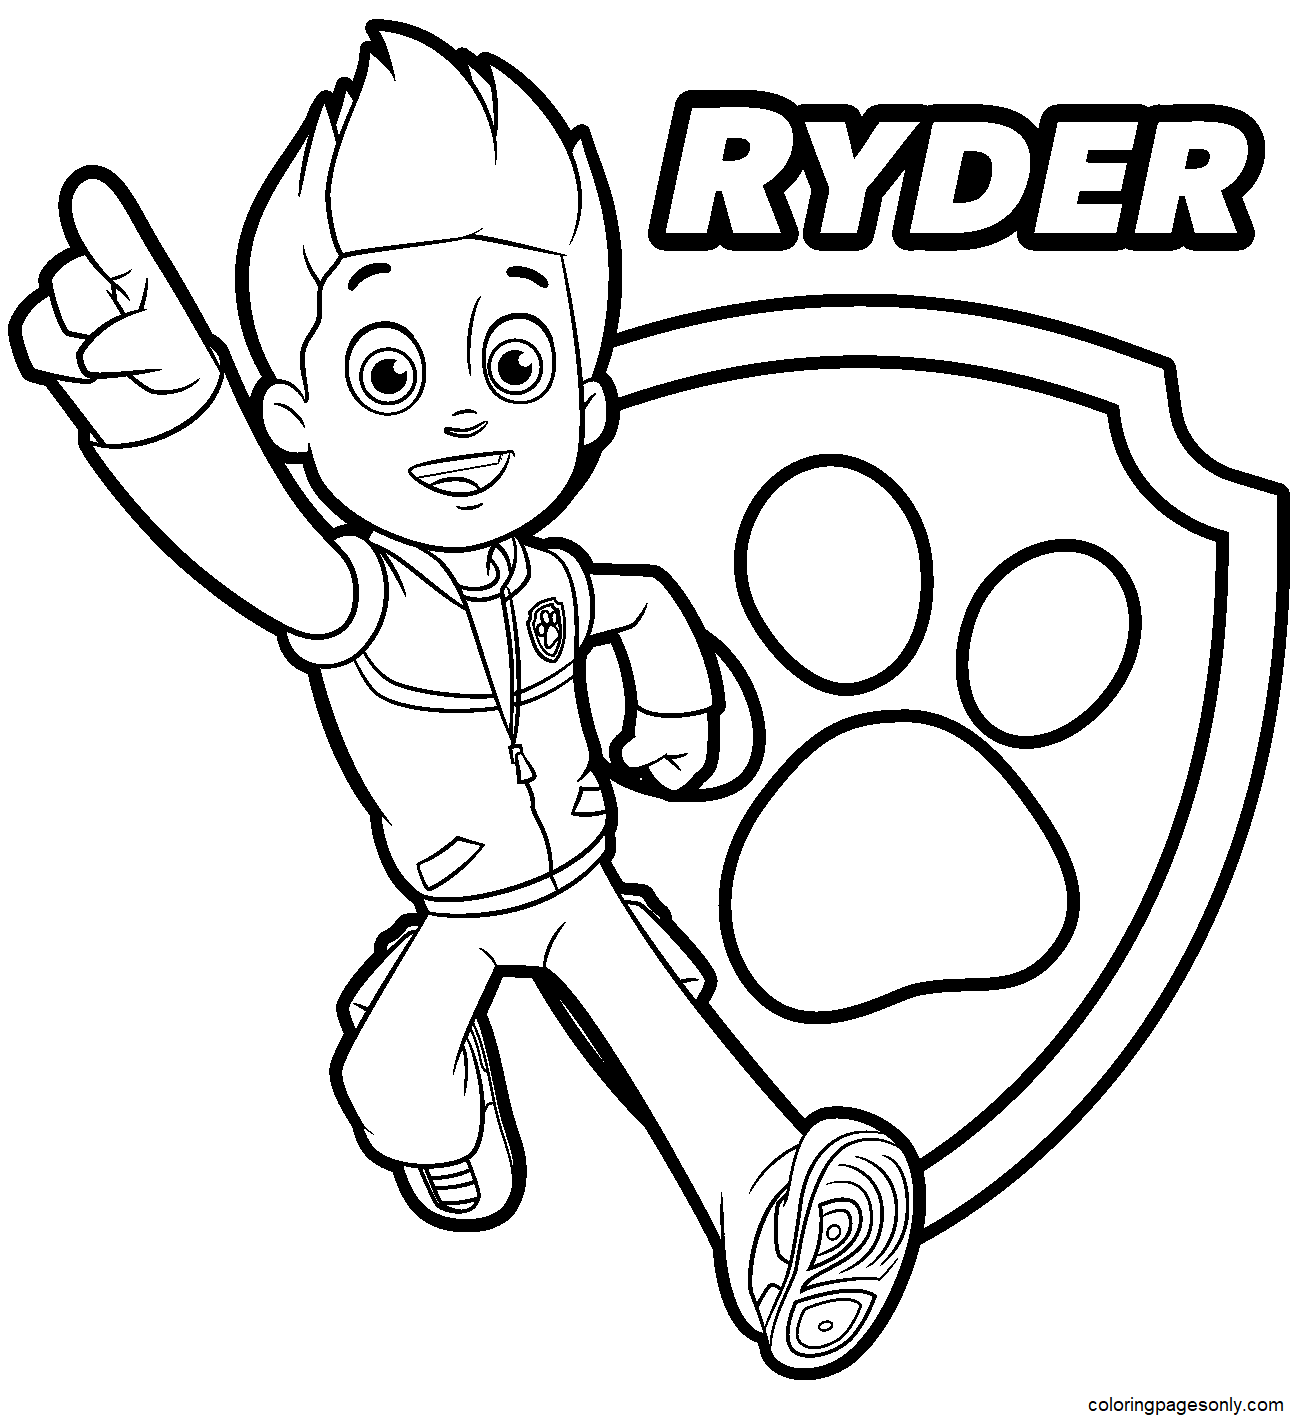 Paw Patrol Ryder 20 Coloring Pages   Cartoons Coloring Pages ...